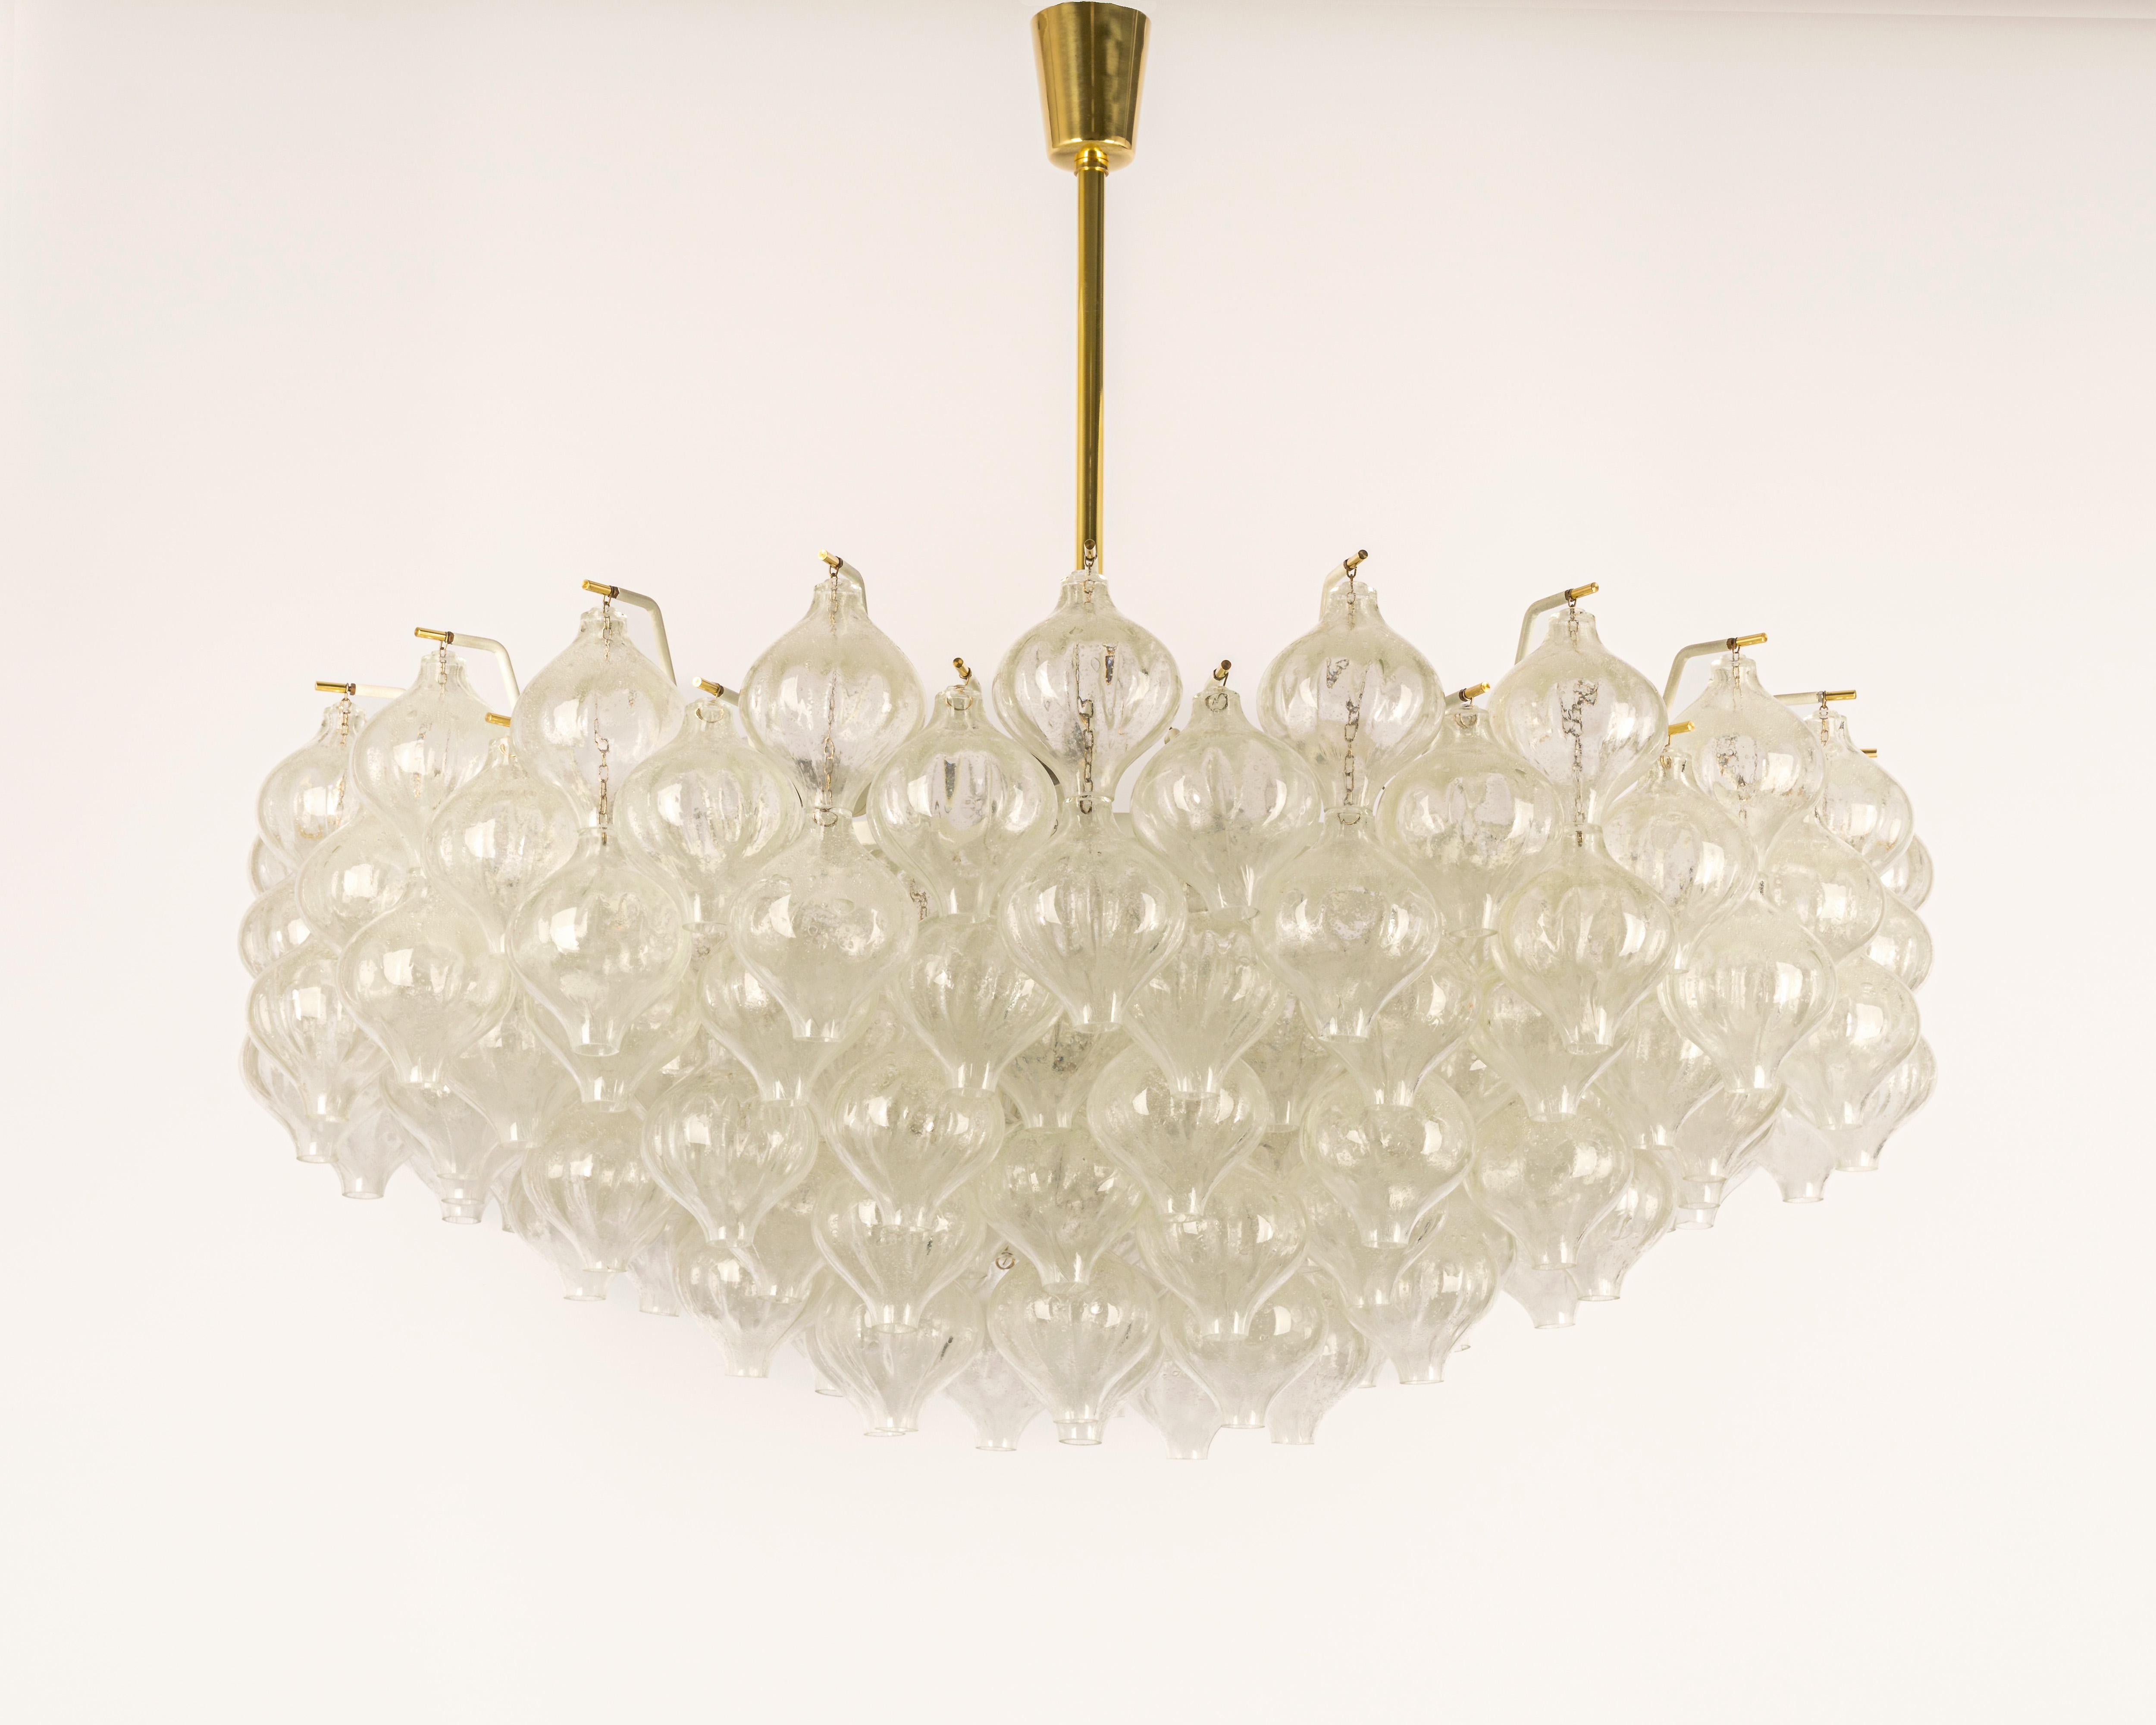 Wonderful onion-shaped -Tulipan glass chandelier. 155 hand-blown glasses suspended on a white painted metal frame.
Best of design from the 1960s by Kalmar, Austria. High quality of the materials.

Sockets: The chandelier takes 28 small screw base